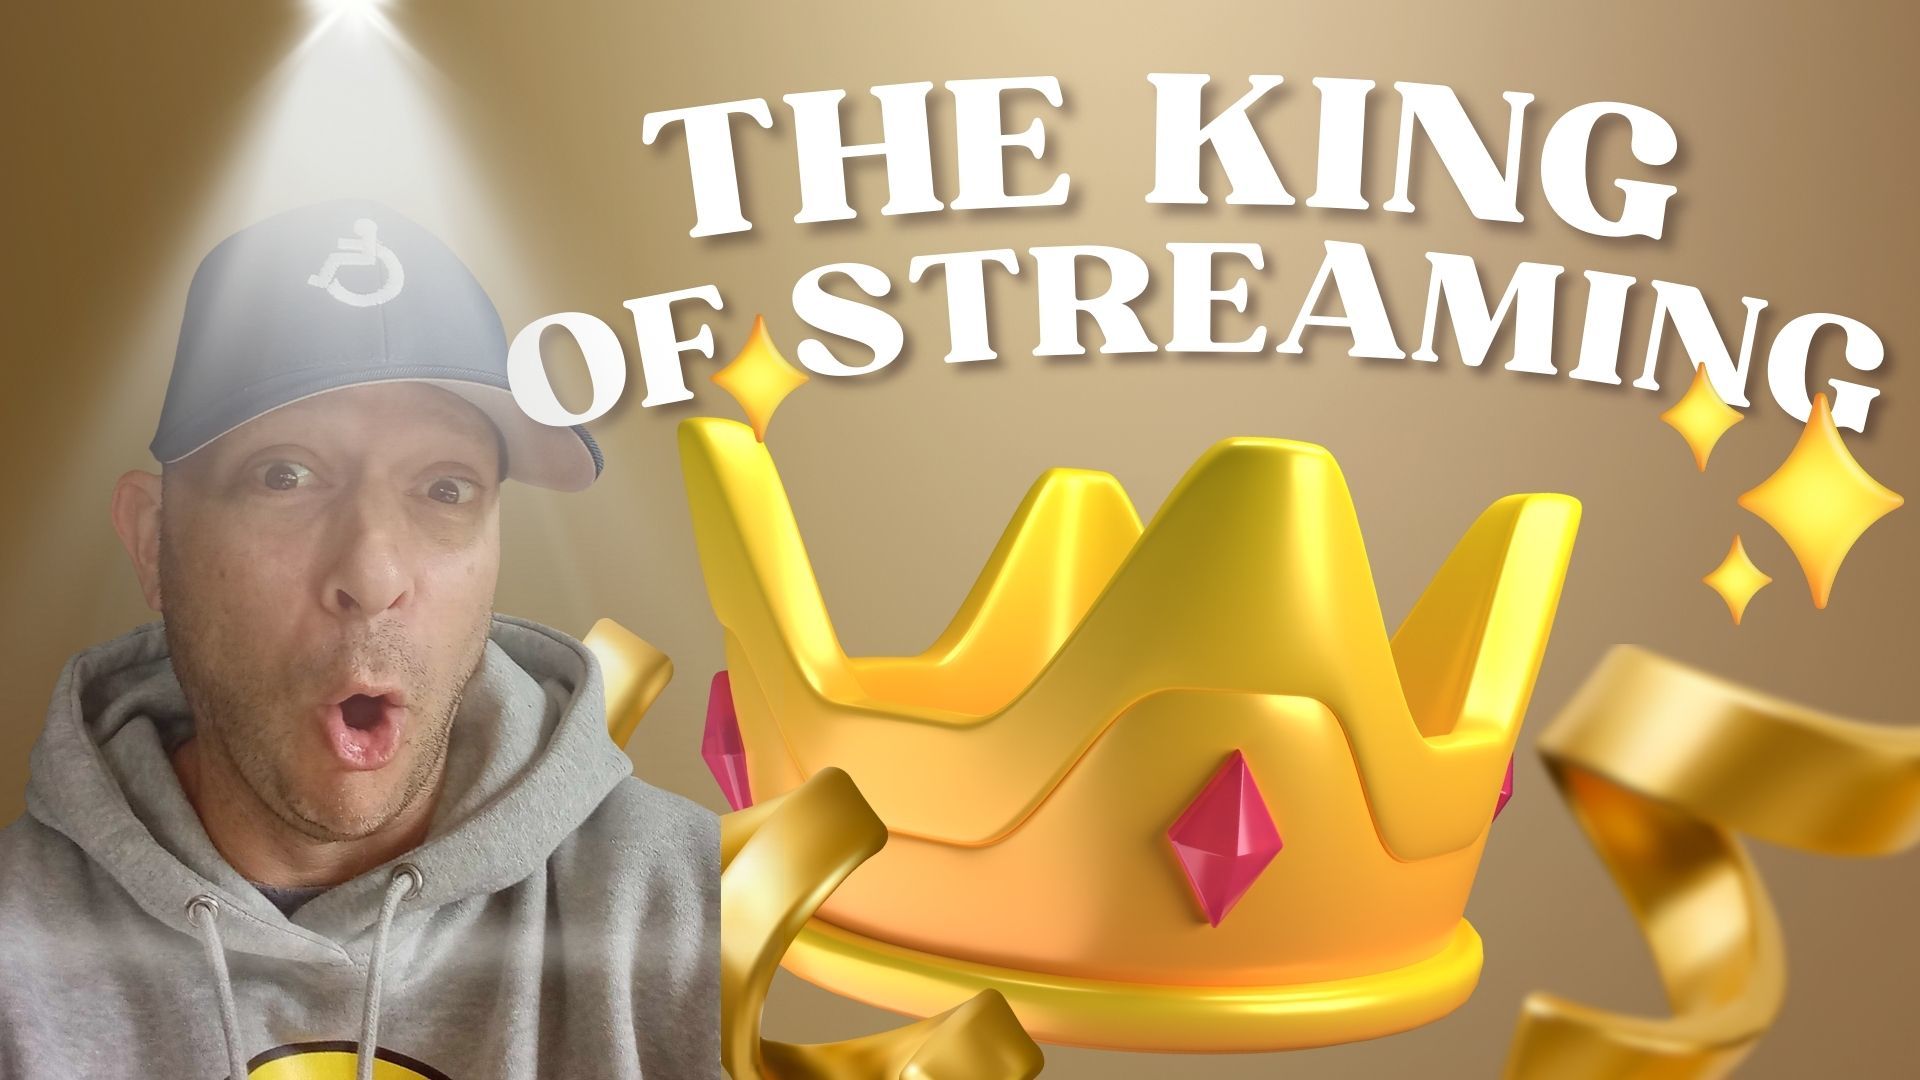 The King of Streaming